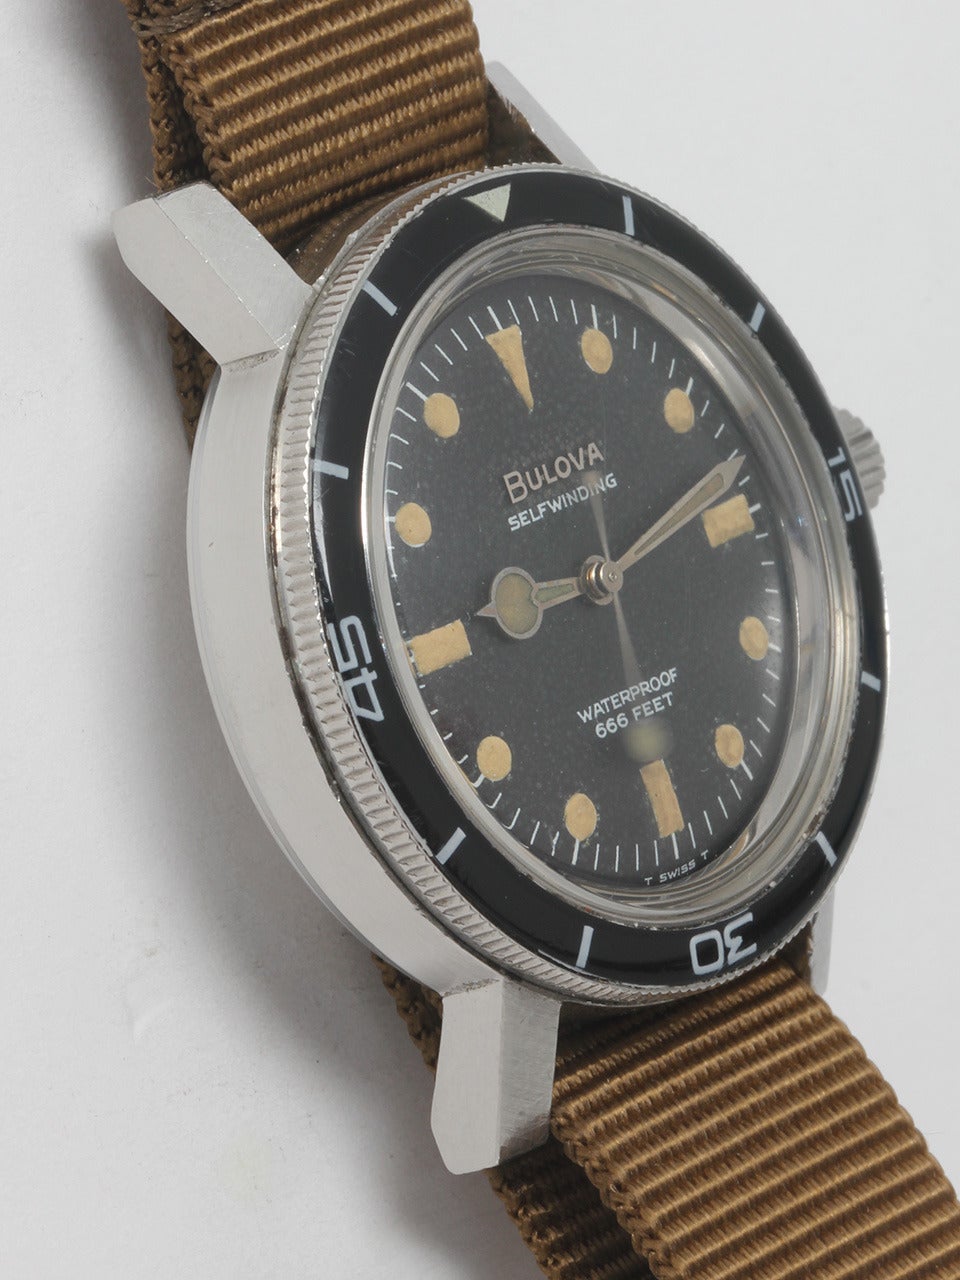 Bulova Stainless Steel Automatic Diver's Wristwatch, circa 1967. Featuring a 37 x 44m screw back case with bakelite bezel and signed crown. Original black dial printed 666ft, warmly patinaed luminous hands. Powered by a self-winding movement with